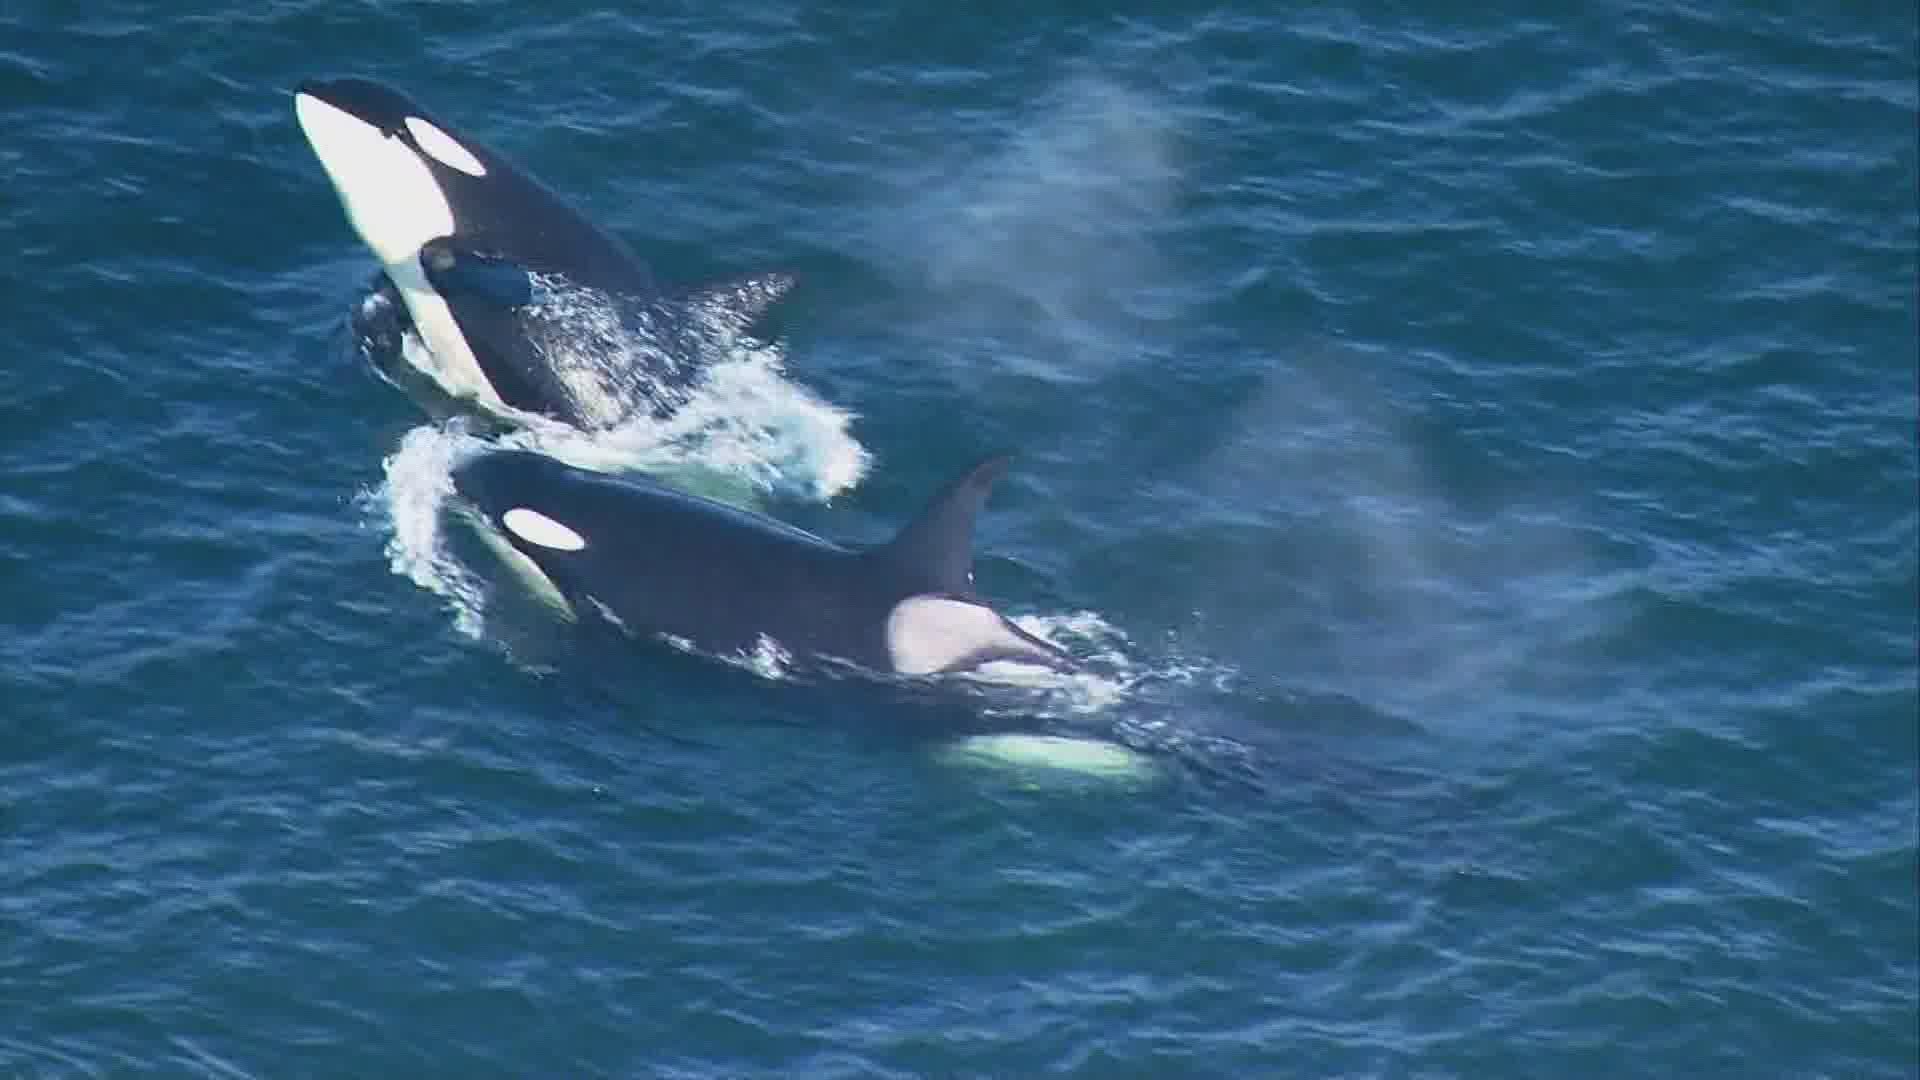 Orca experts say Southern Resident whales are starving and heading toward extinction. Federal scientists say Seattle's Skagit River dams are making conditions worse.